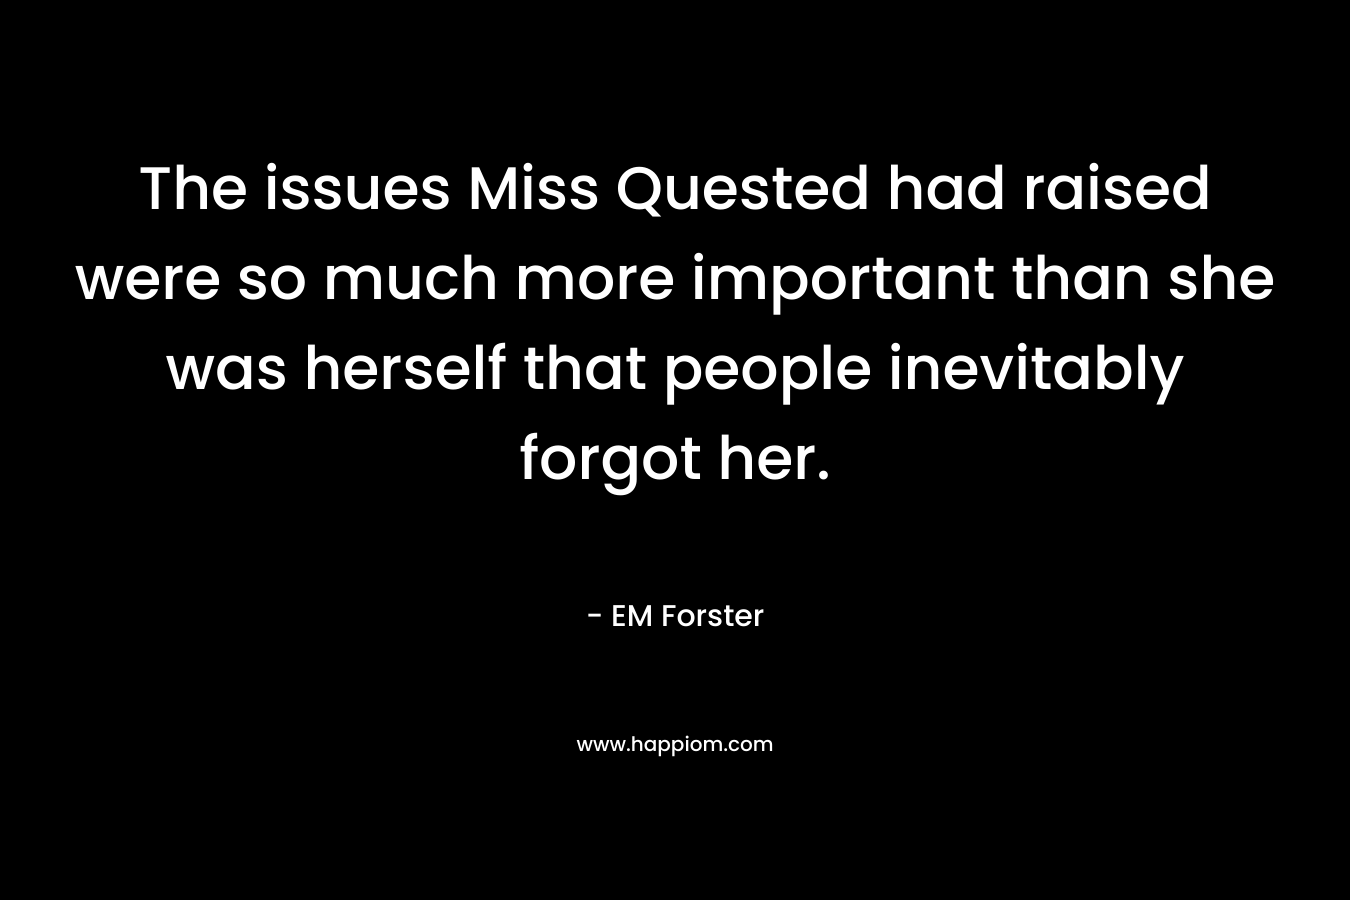 The issues Miss Quested had raised were so much more important than she was herself that people inevitably forgot her. – EM Forster